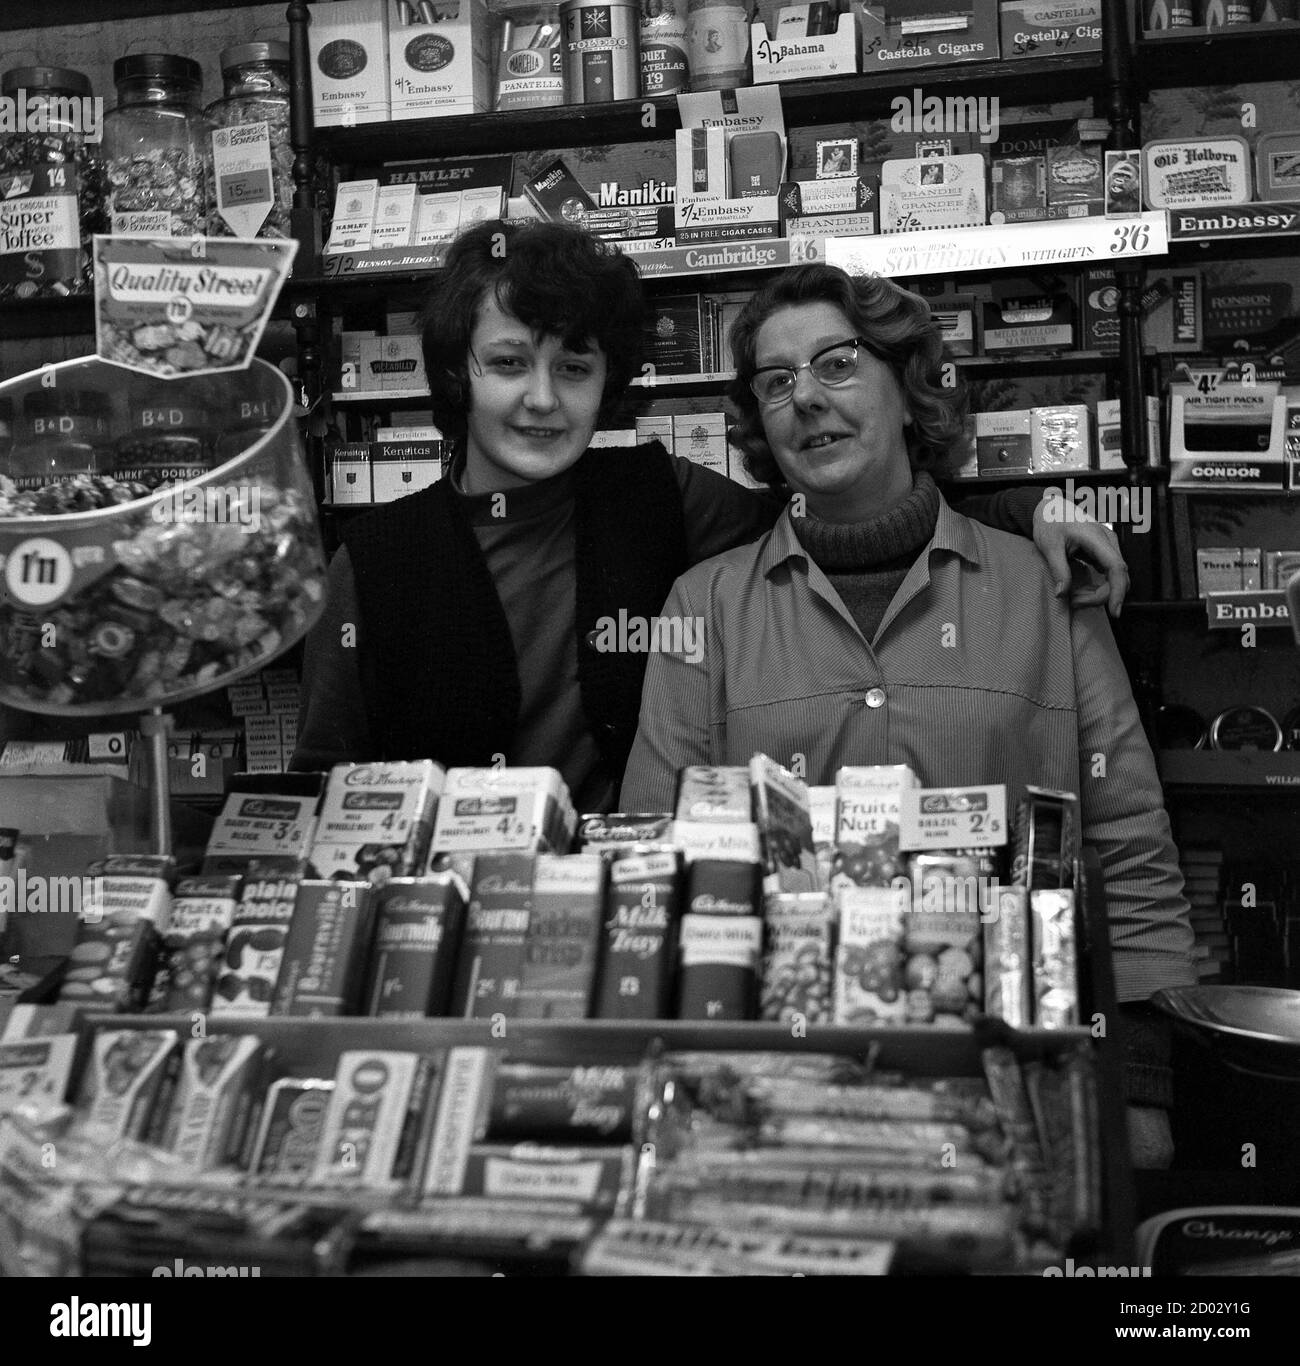 AJAXNETPHOTO. 1970. SOUTHSEA, ENGLAND. - SWEETS AND TOBACCO - MRS CROSS (RIGHT) PROPRIETOR OF THE CARLTON TOBACCONIST AND SWEET SHOP IN KENT ROAD WITH HER SON.PHOTO:JONATHAN EASTLAND/AJAX REF:1970 21 Stock Photo